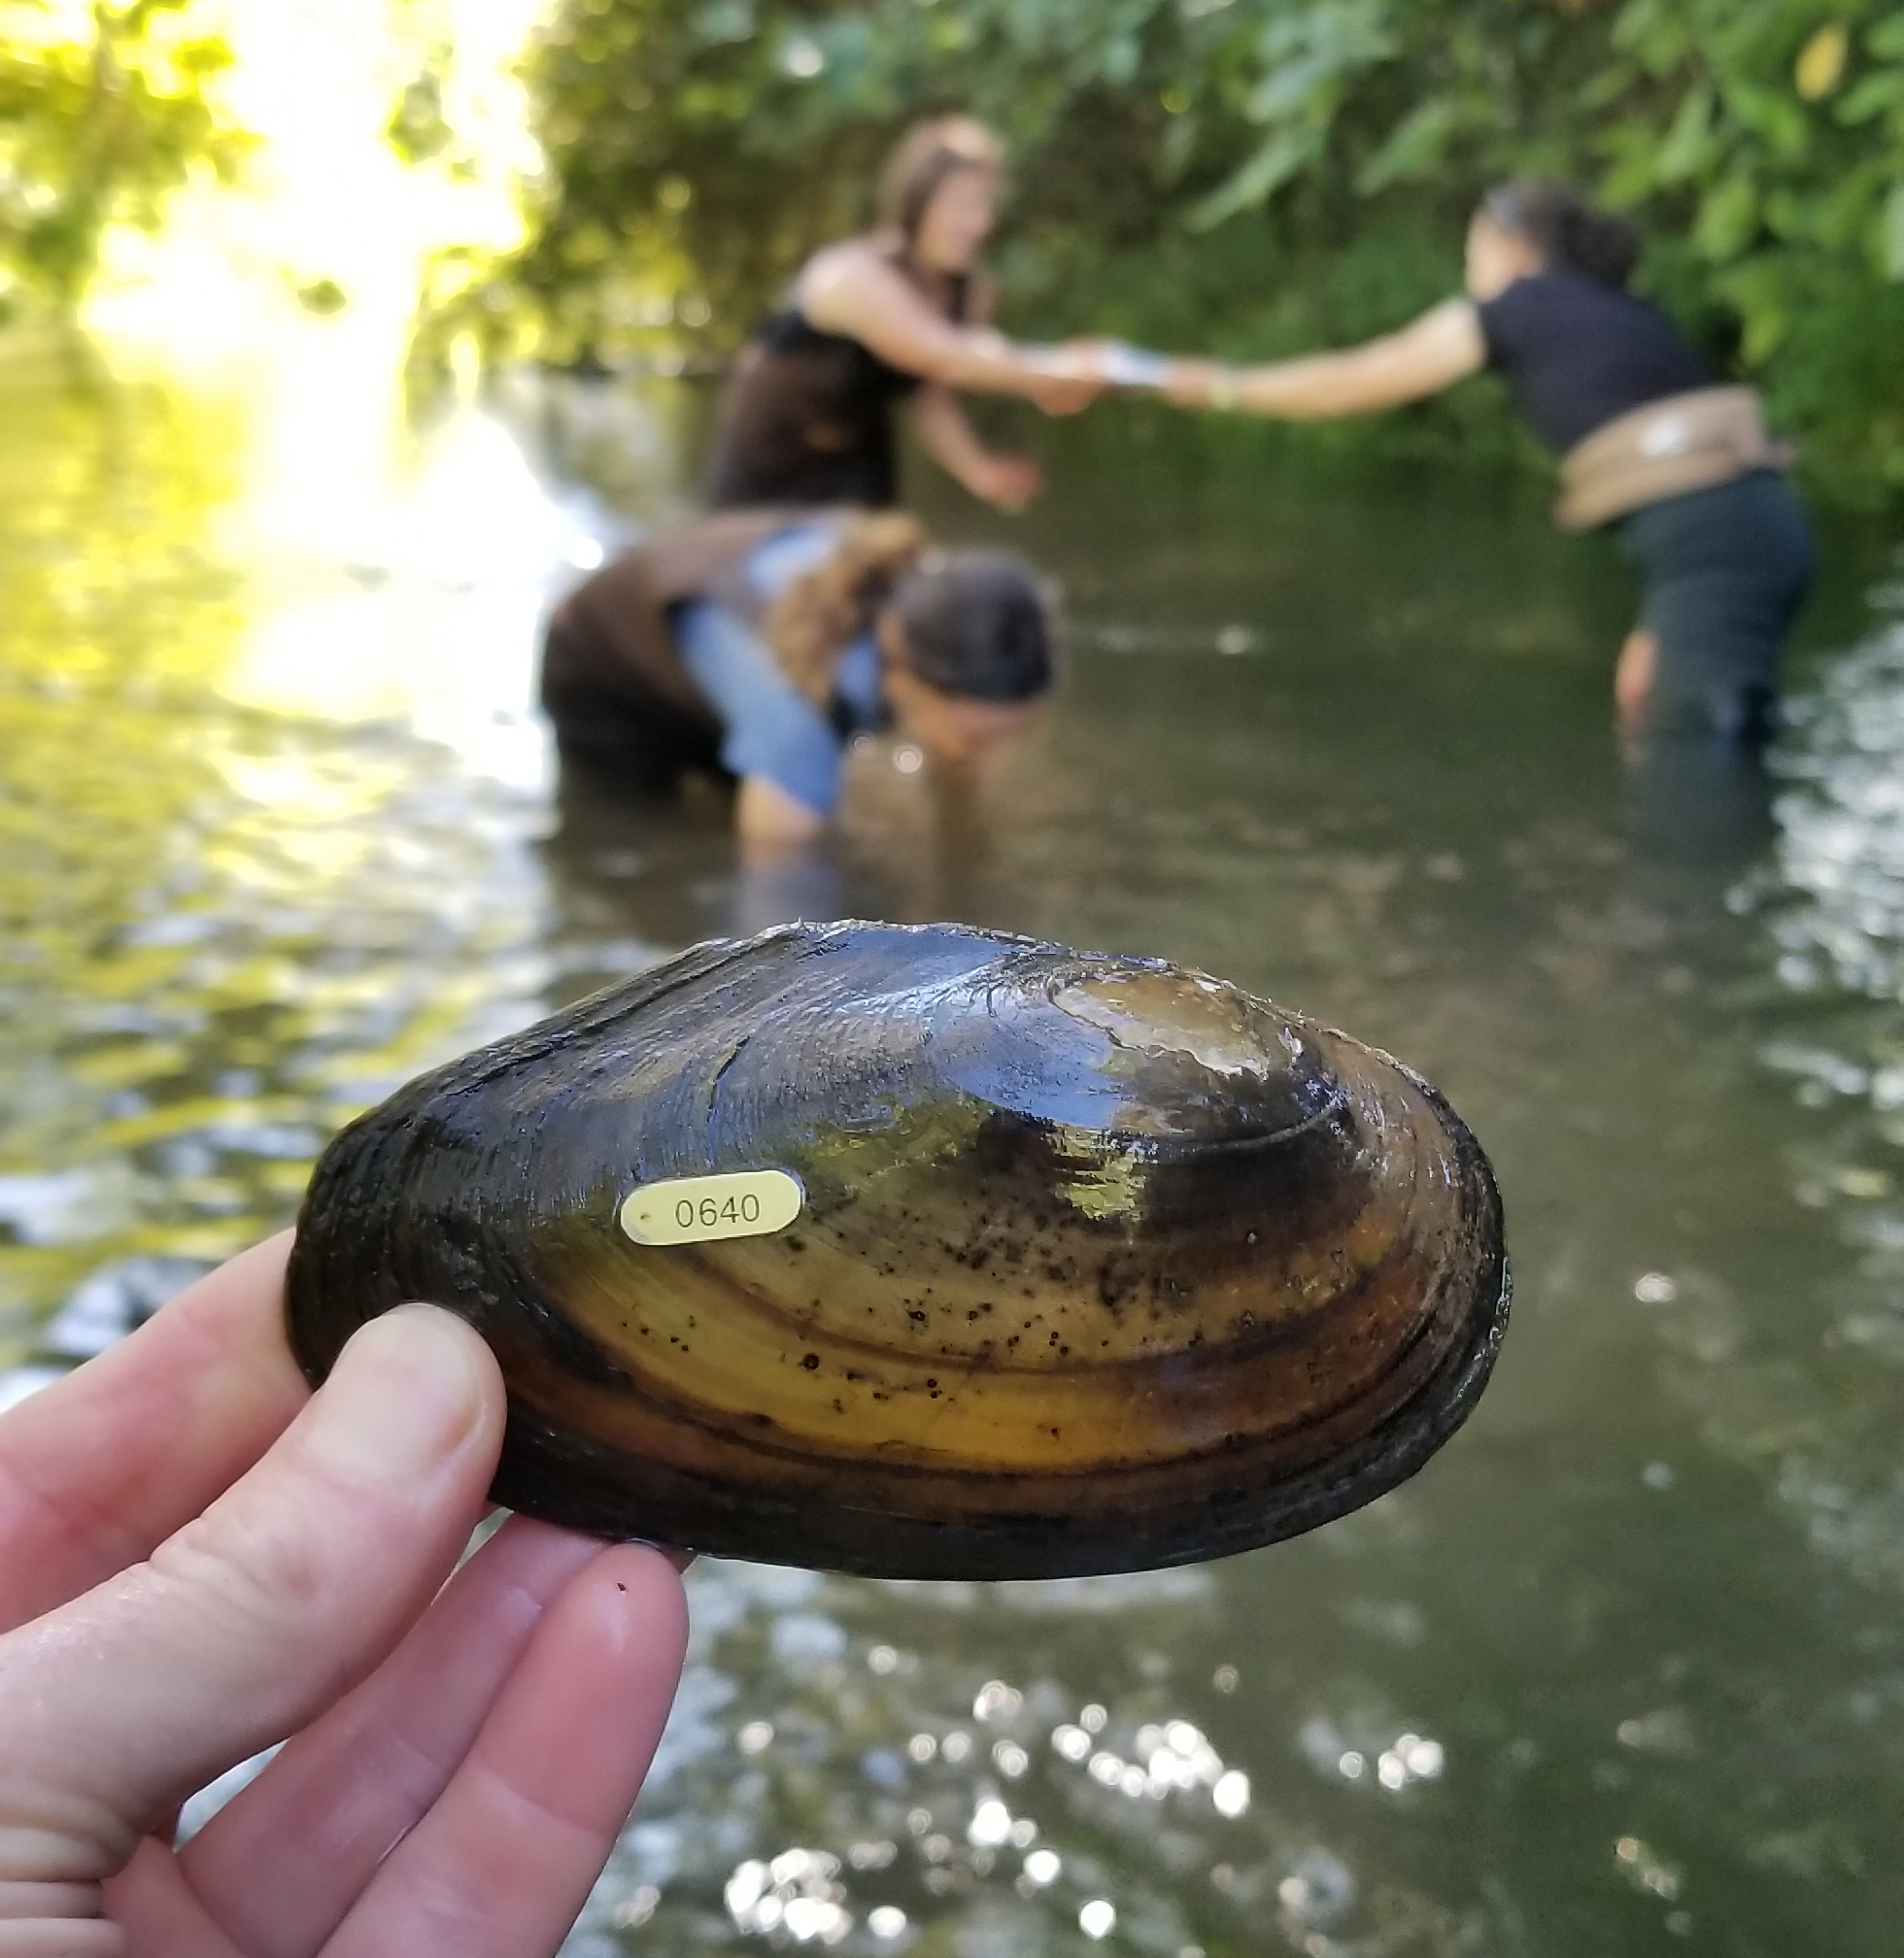 Women wading in a thigh-deep stream pass a freshwater mussel (a large shell) between them.